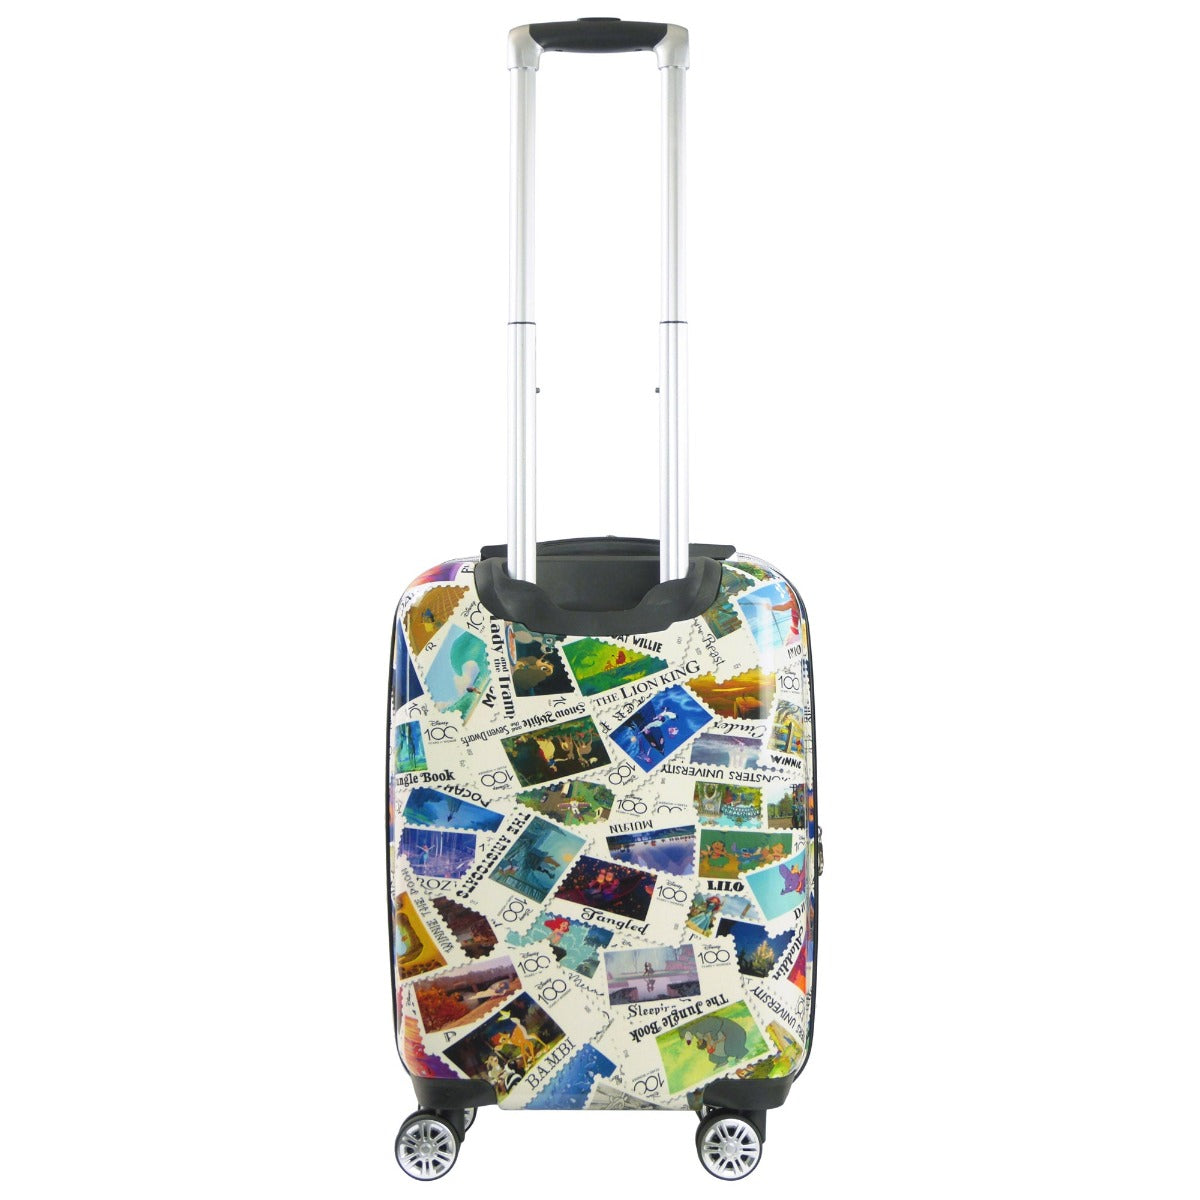 Ful Disney 100 Year Anniversary Stamps ABS Hardsided Spinner Suitcase 22 inch carry-on Luggage 360 spinner wheels Limited Edition retractable handle 360 degree wheels